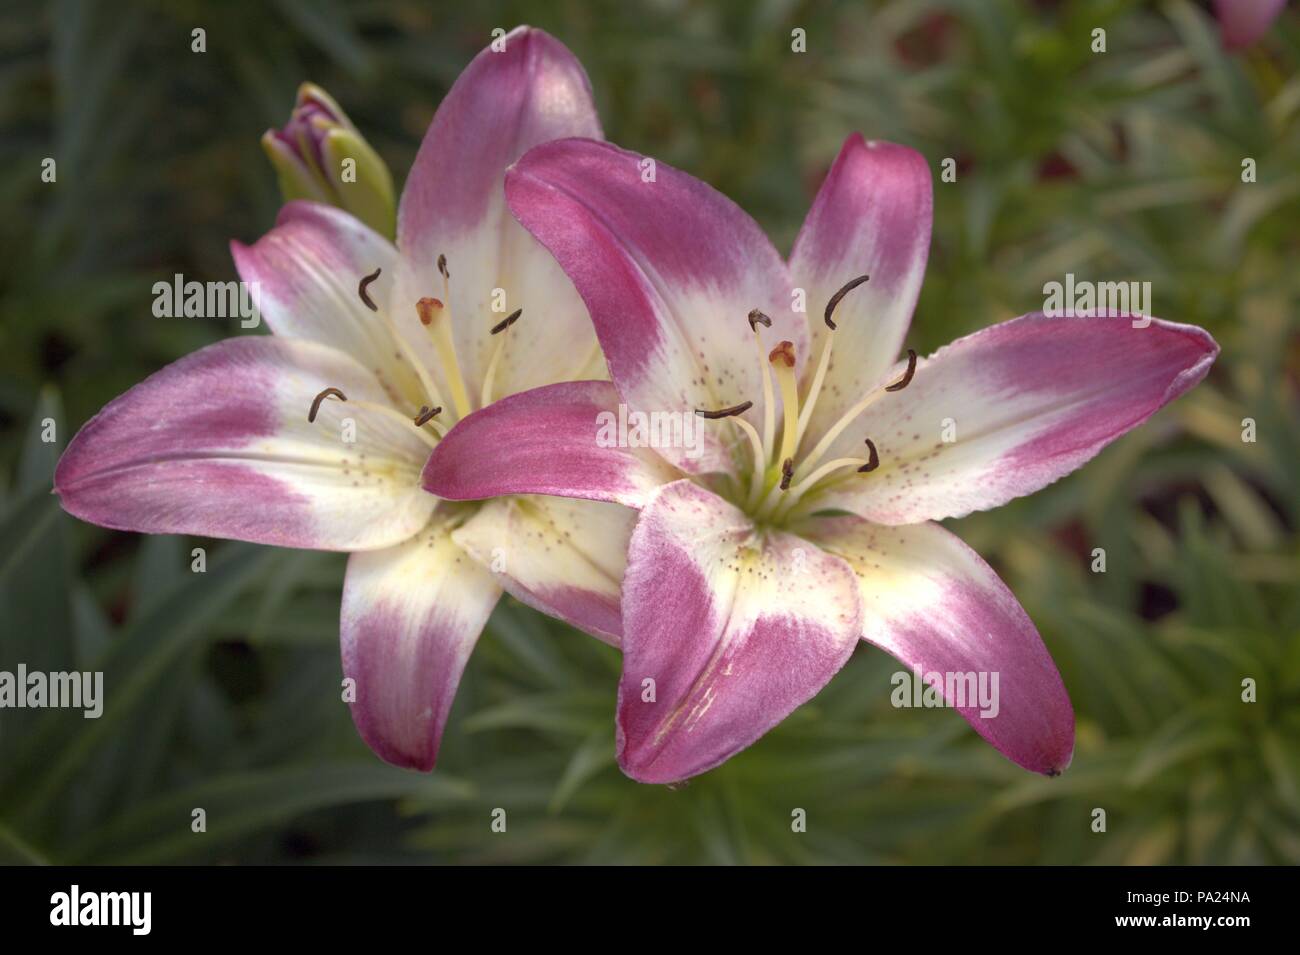 Two Pink and White Lilies Blooming Stock Photo